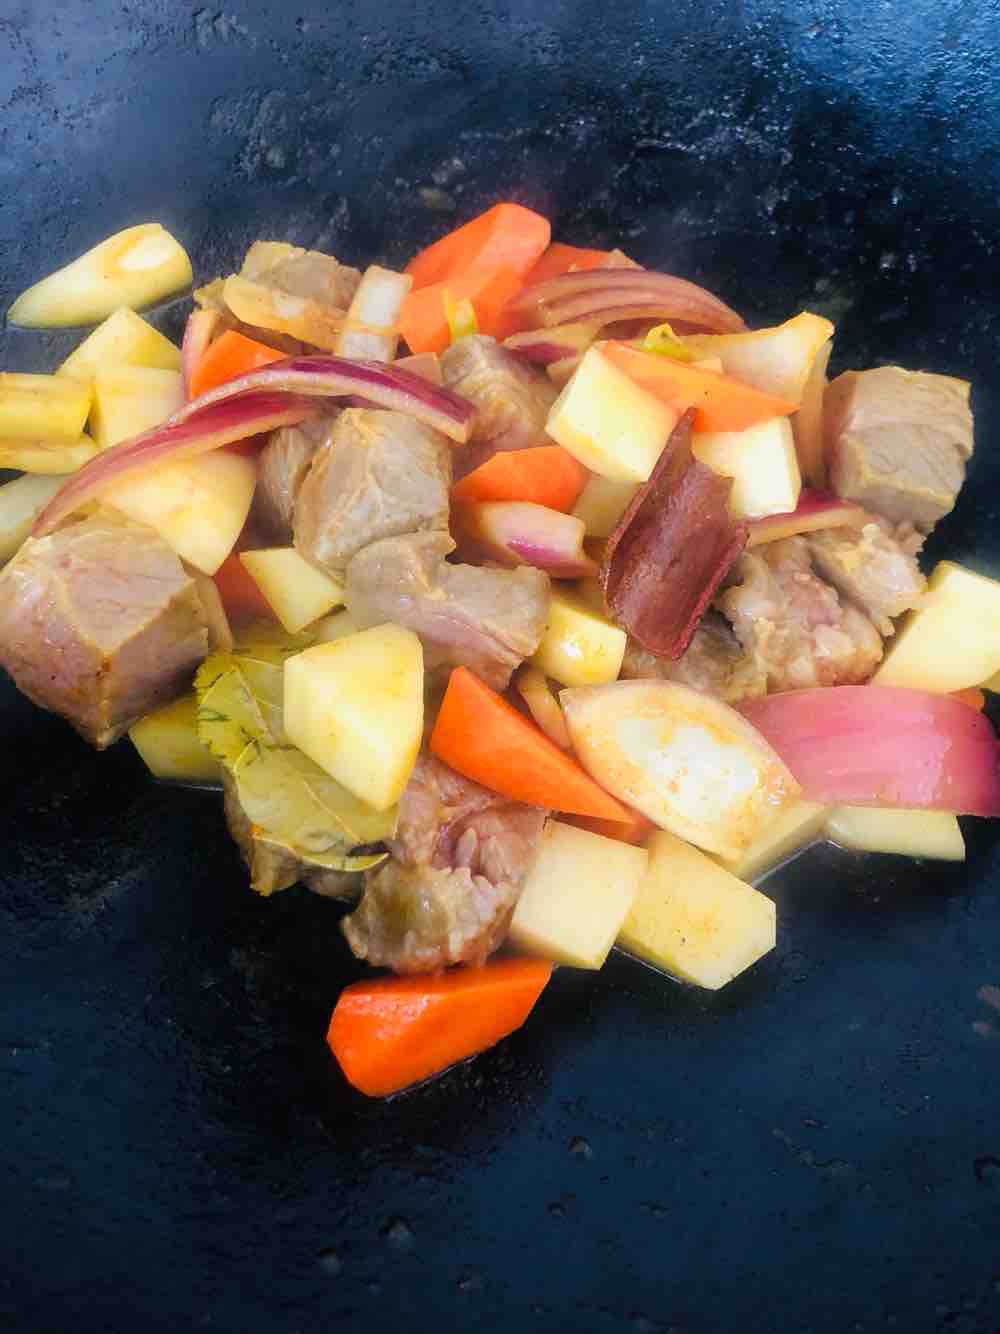 Curry Beef Potatoes recipe